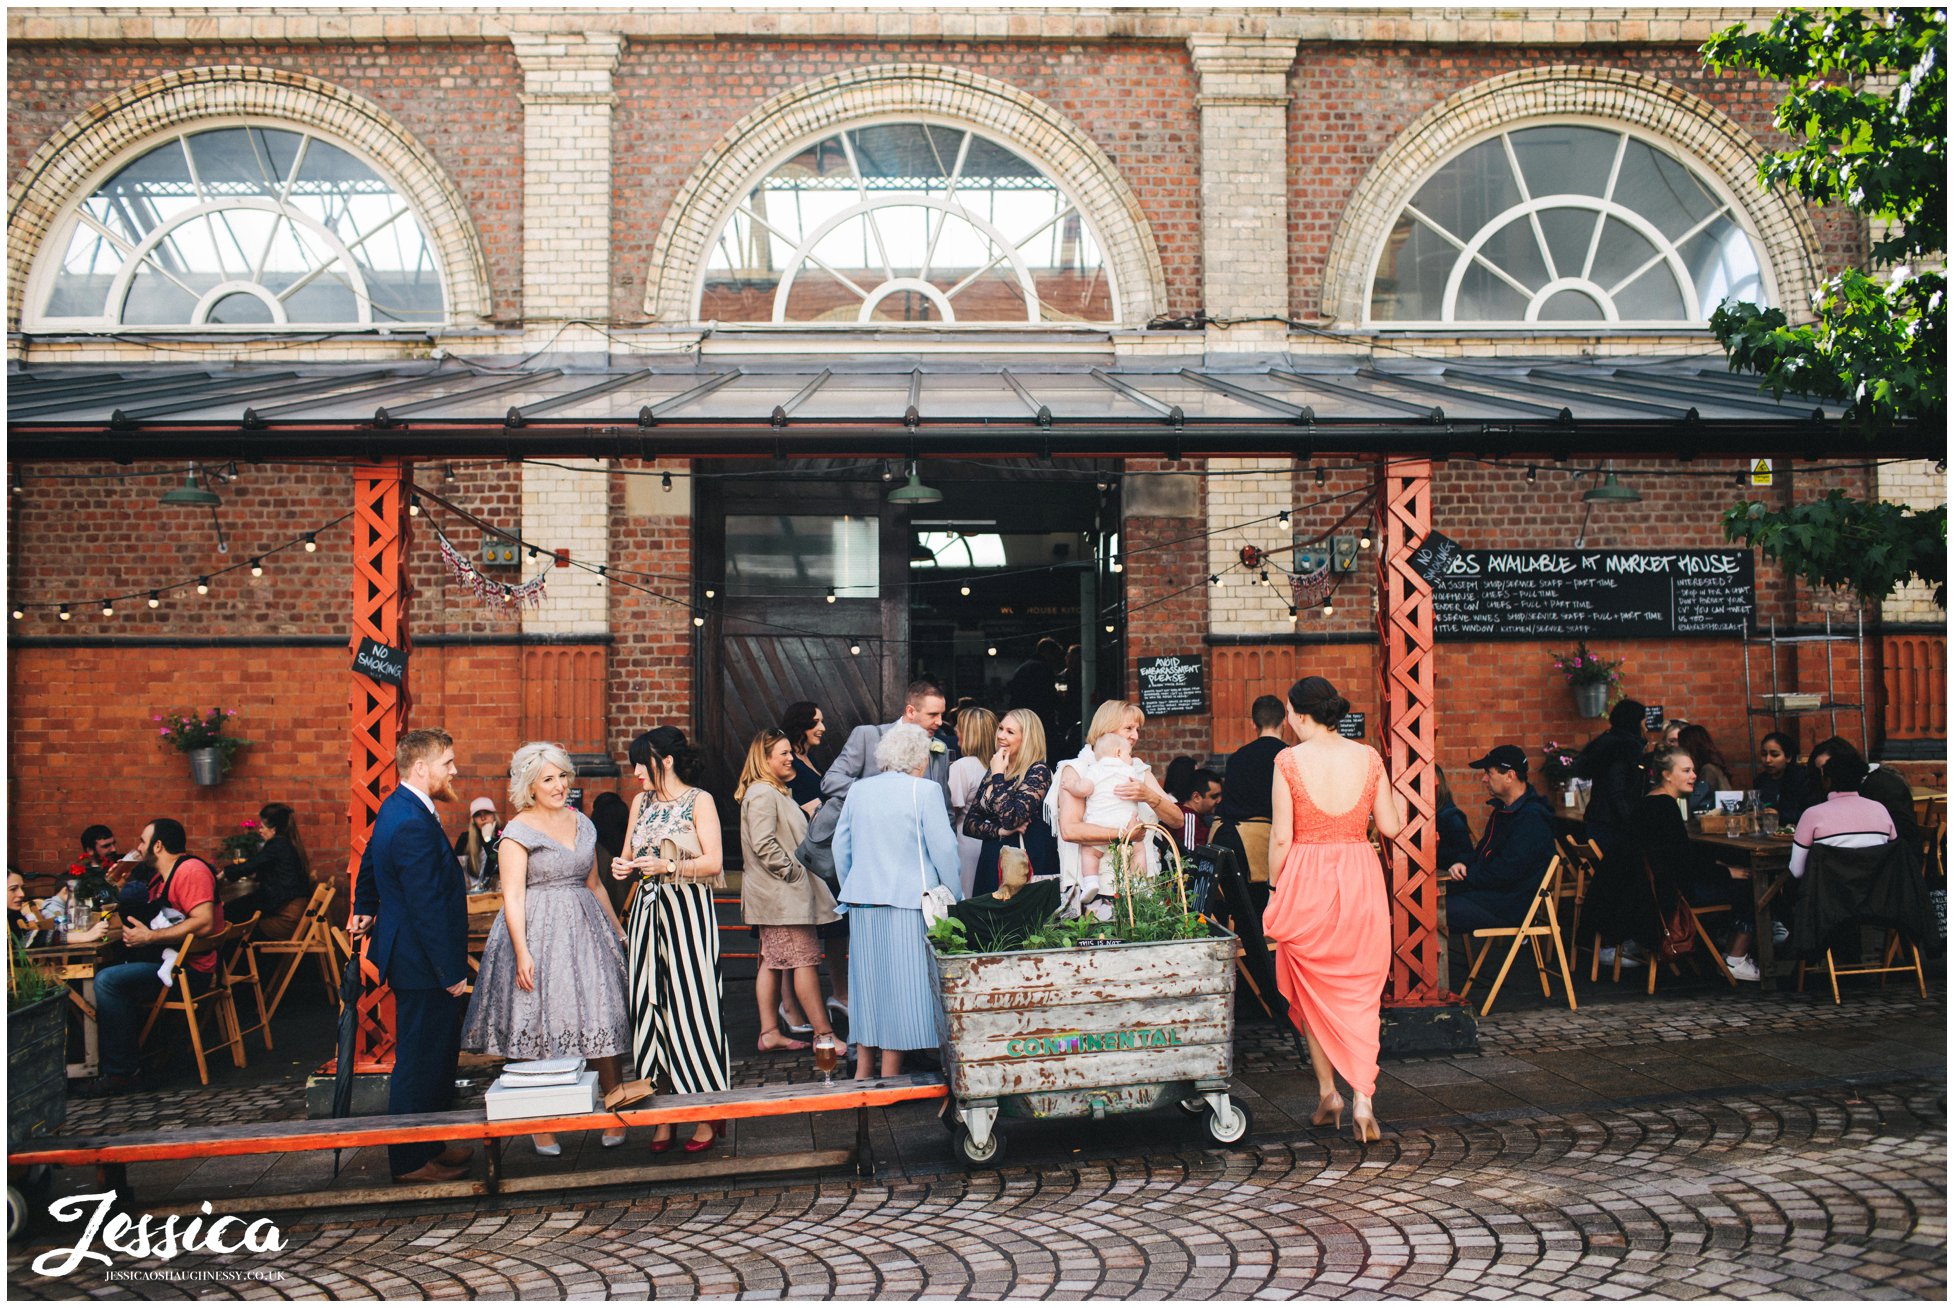 photograph of wedding guests outside altrincham market